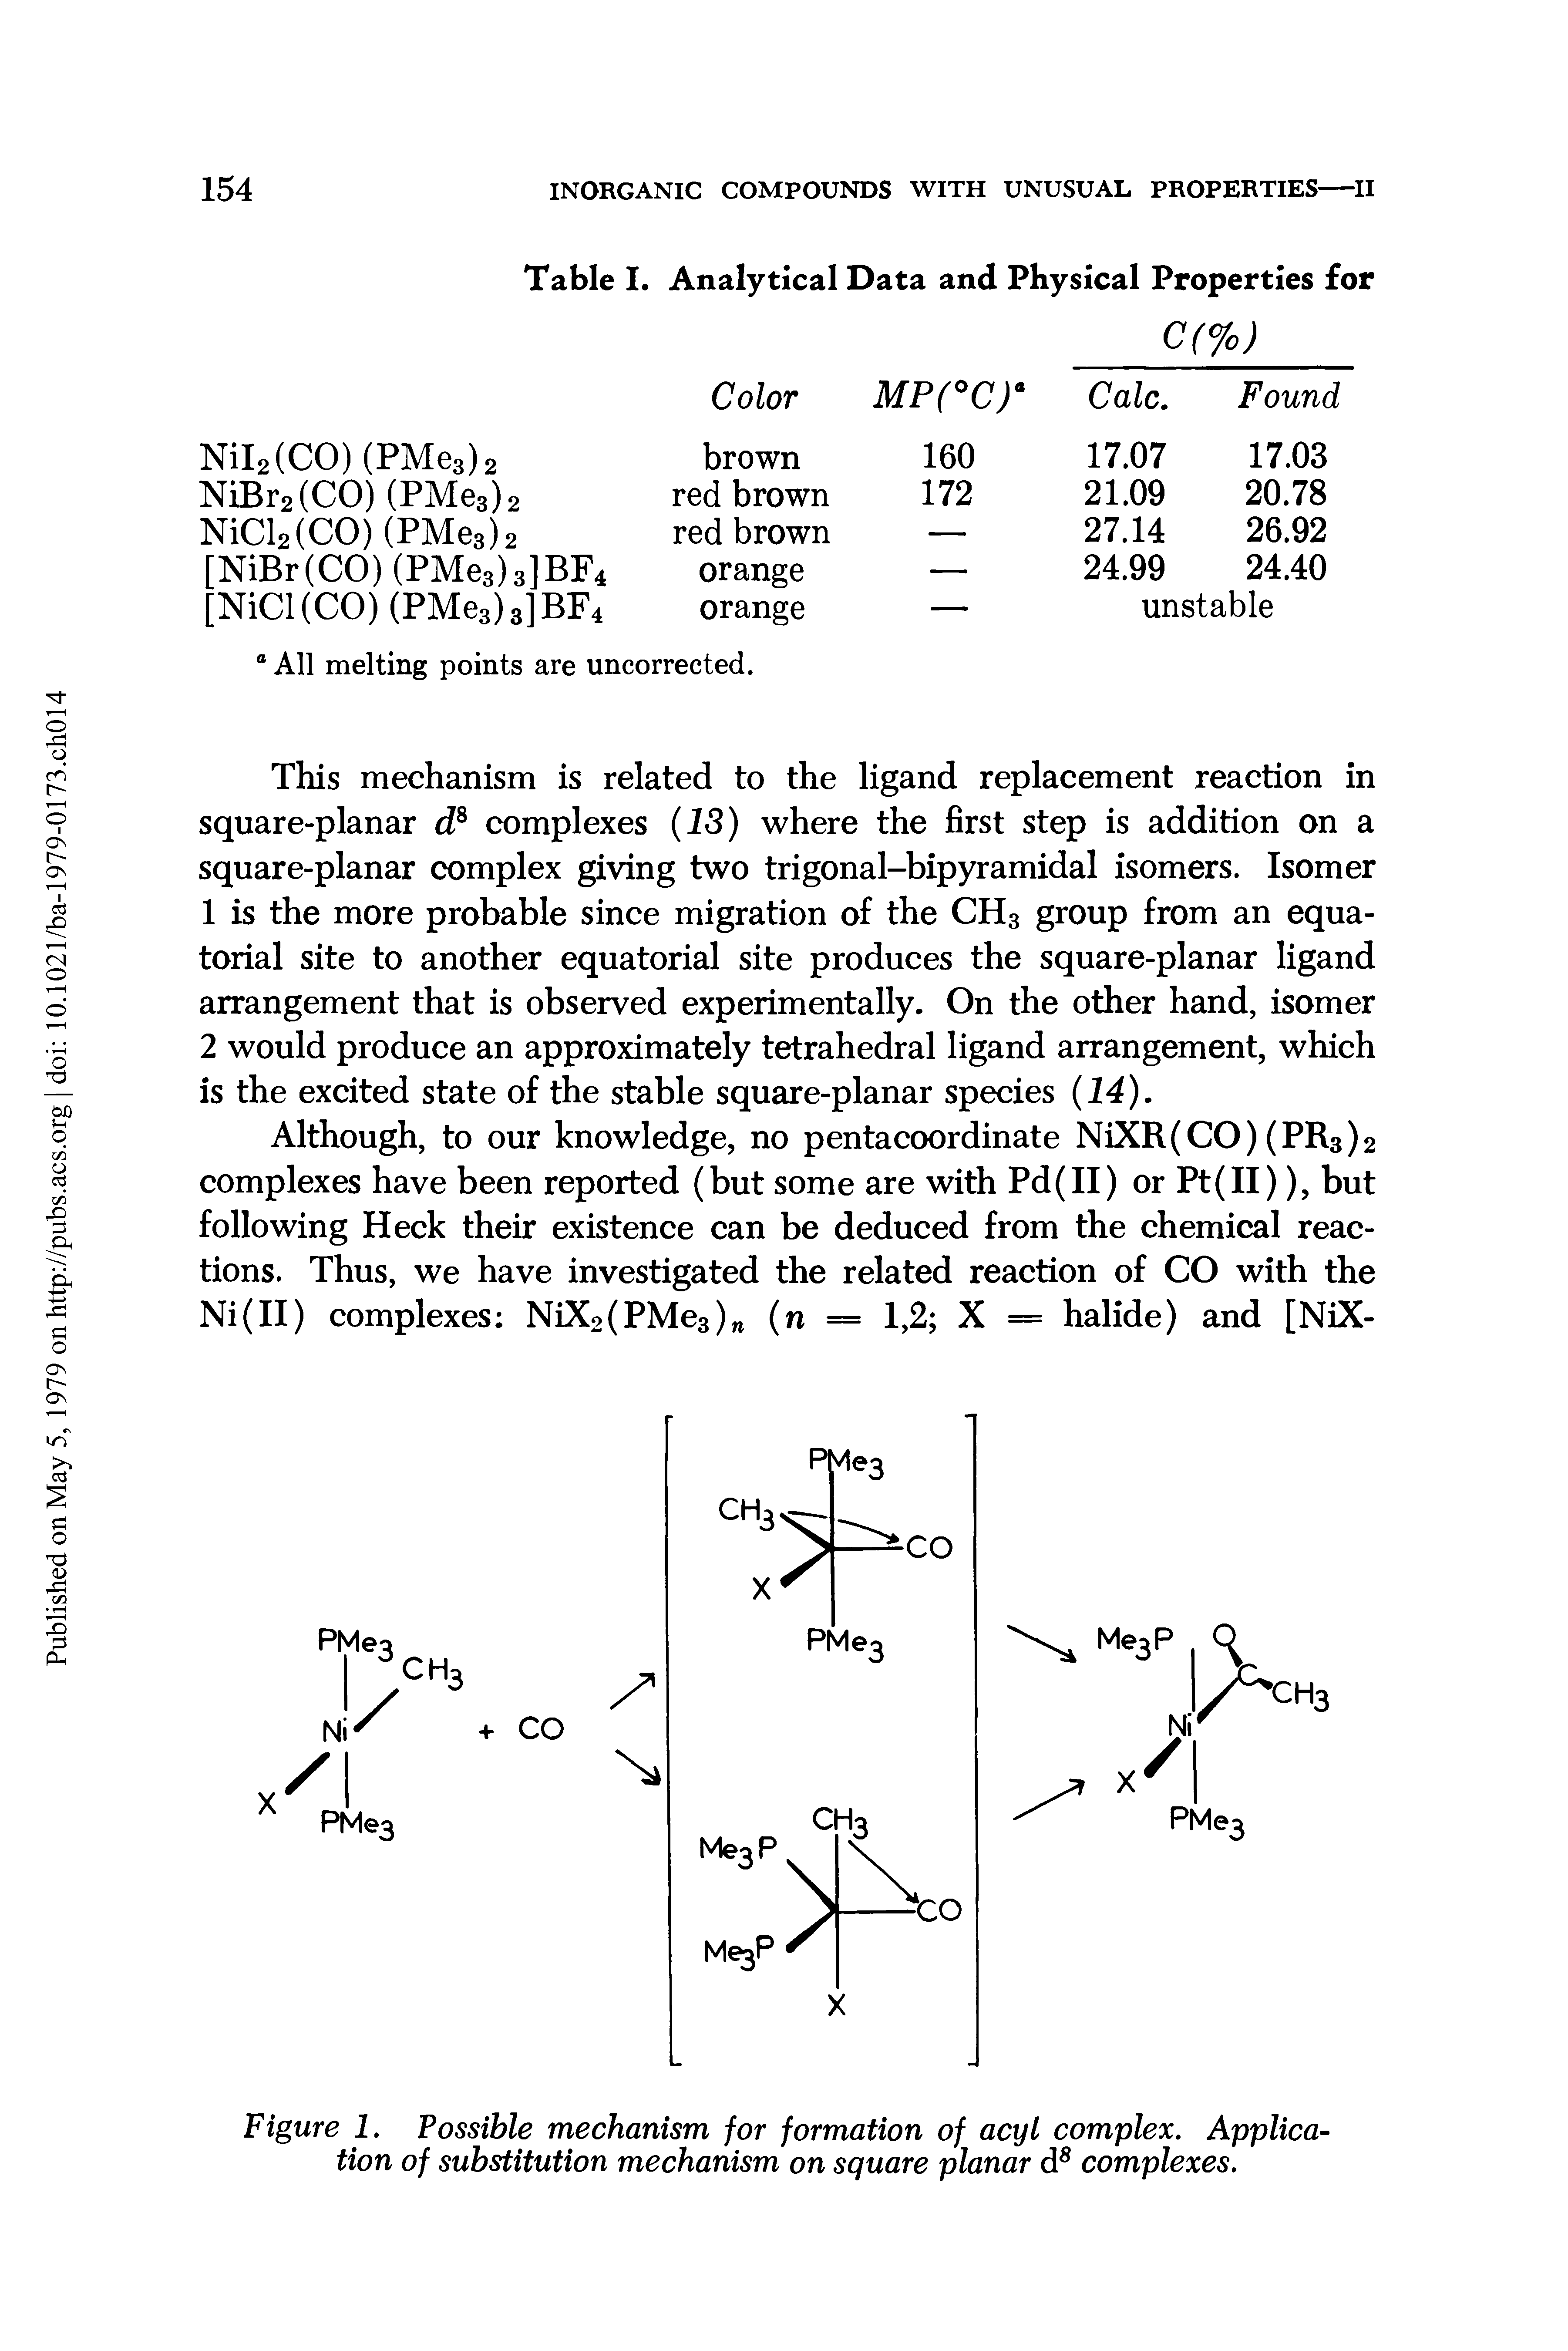 Figure 1. Possible mechanism for formation of acyl complex. Application of substitution mechanism on square planar d complexes.